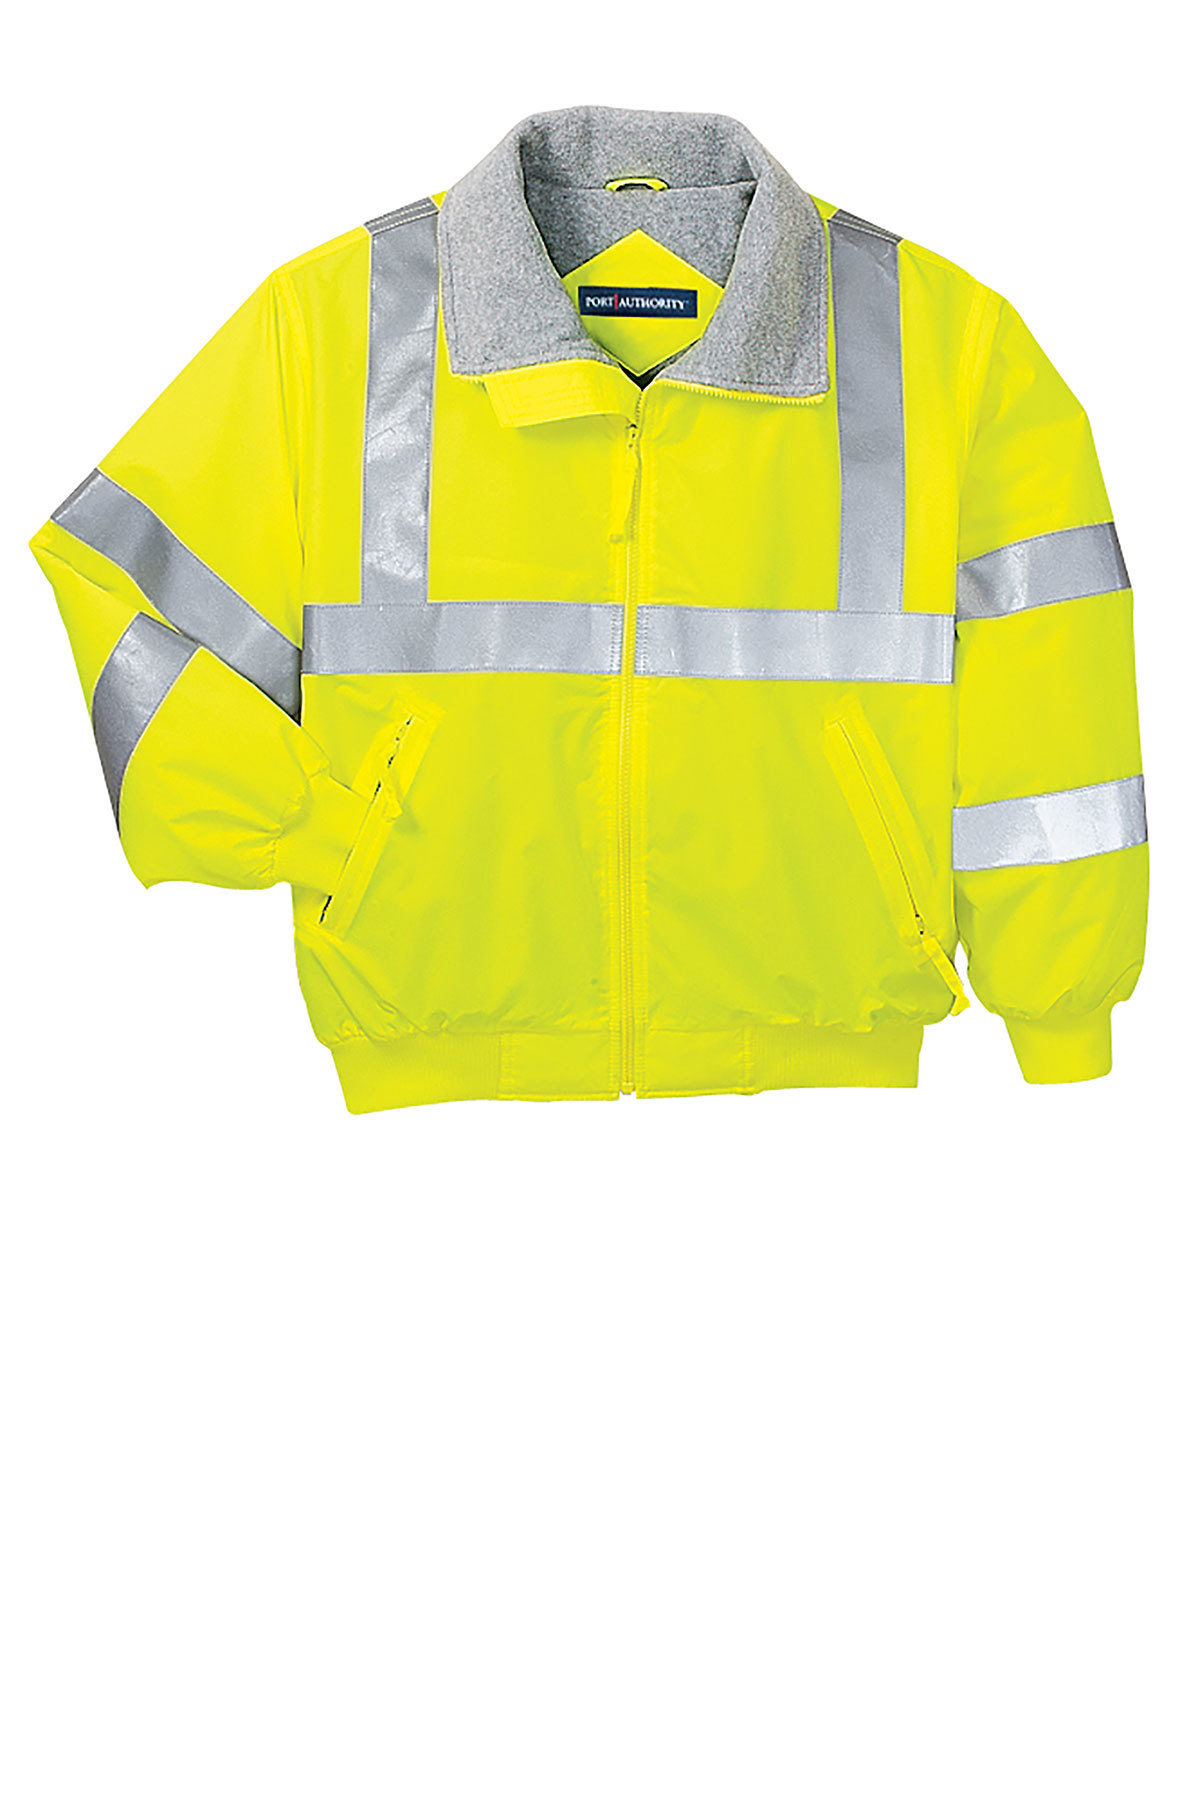 Safety Challenger Jacket with Reflective Taping Safety Orange/ Reflective_3XL SRJ754 Port Authority 